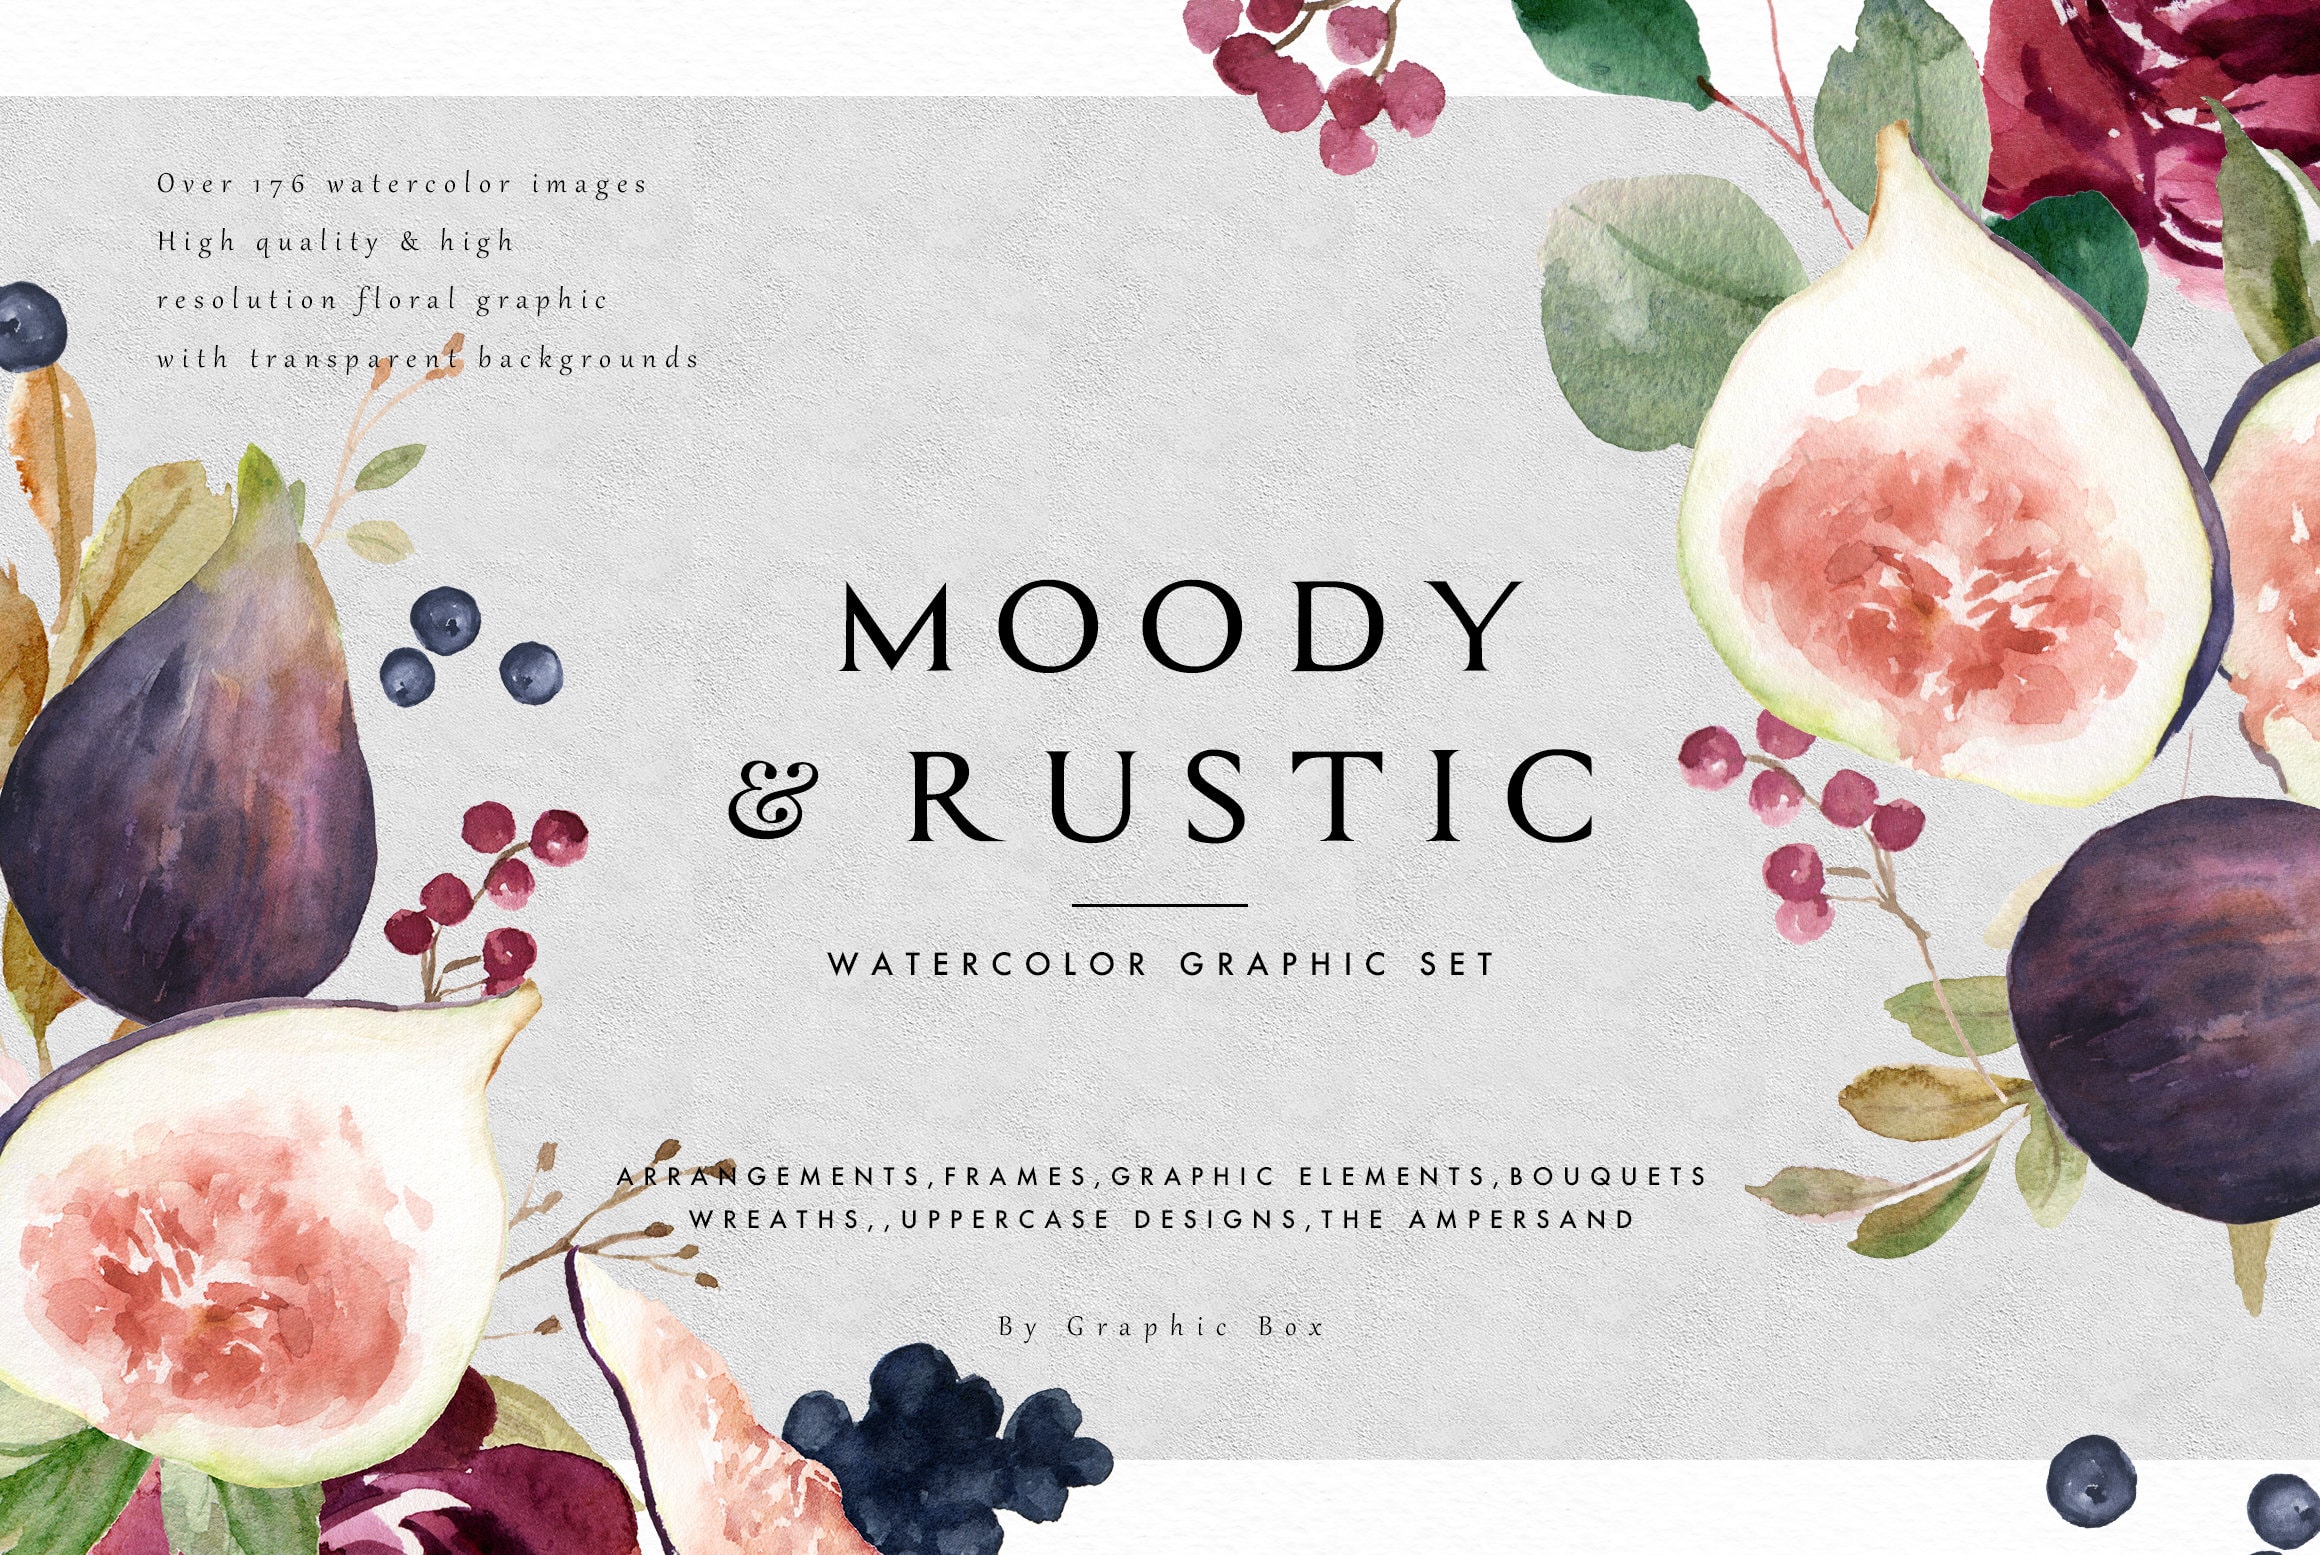 Download Moody Rustic Watercolor Graphic Setlarge Setweddingclip Art Collectionindividual Png Fileshand Paintedwedding Invitation Drawing Illustration Art Collectibles Tripod Ee